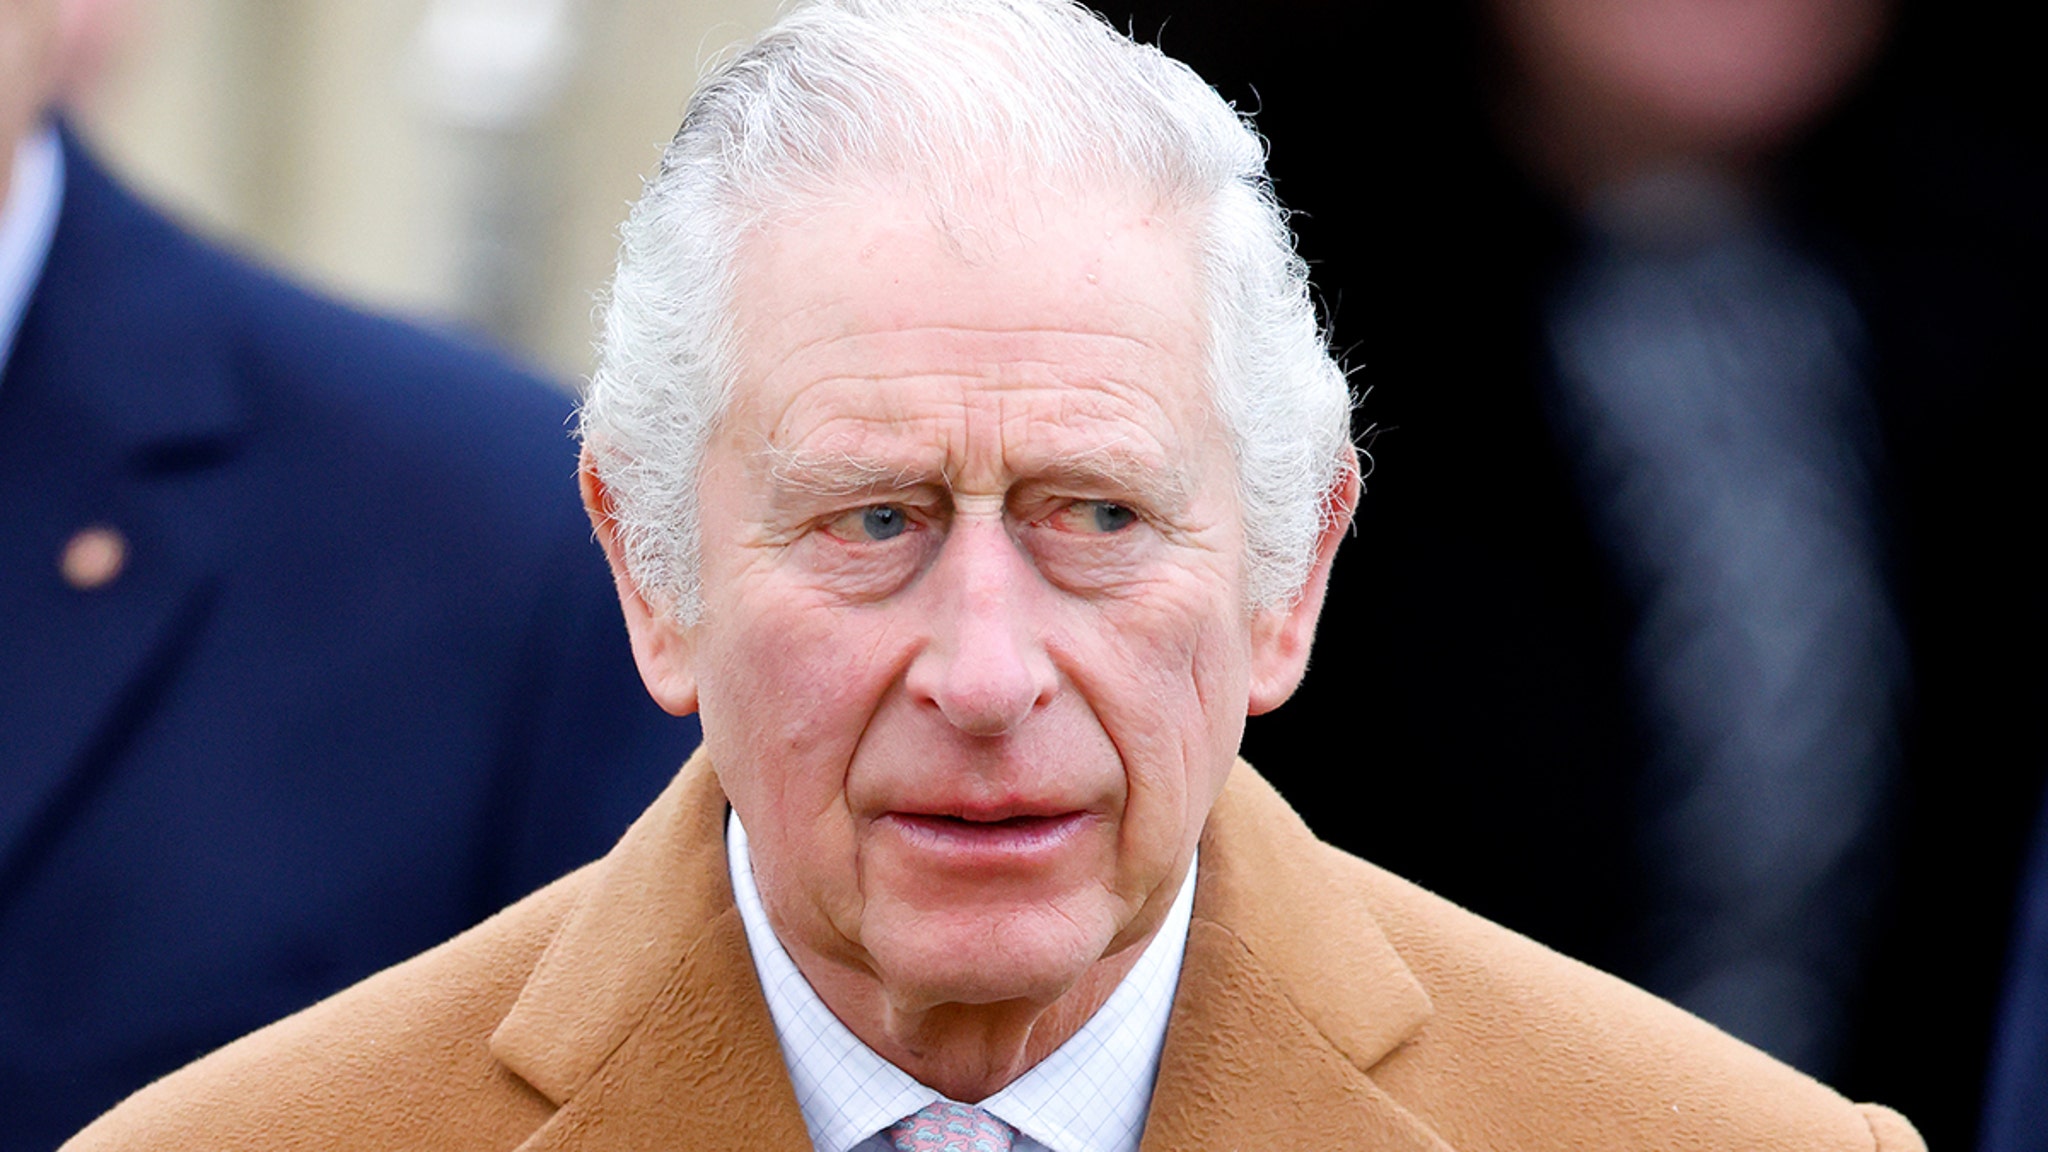 King Charles Funeral Plans Reportedly Being Discussed Amid Cancer Battle